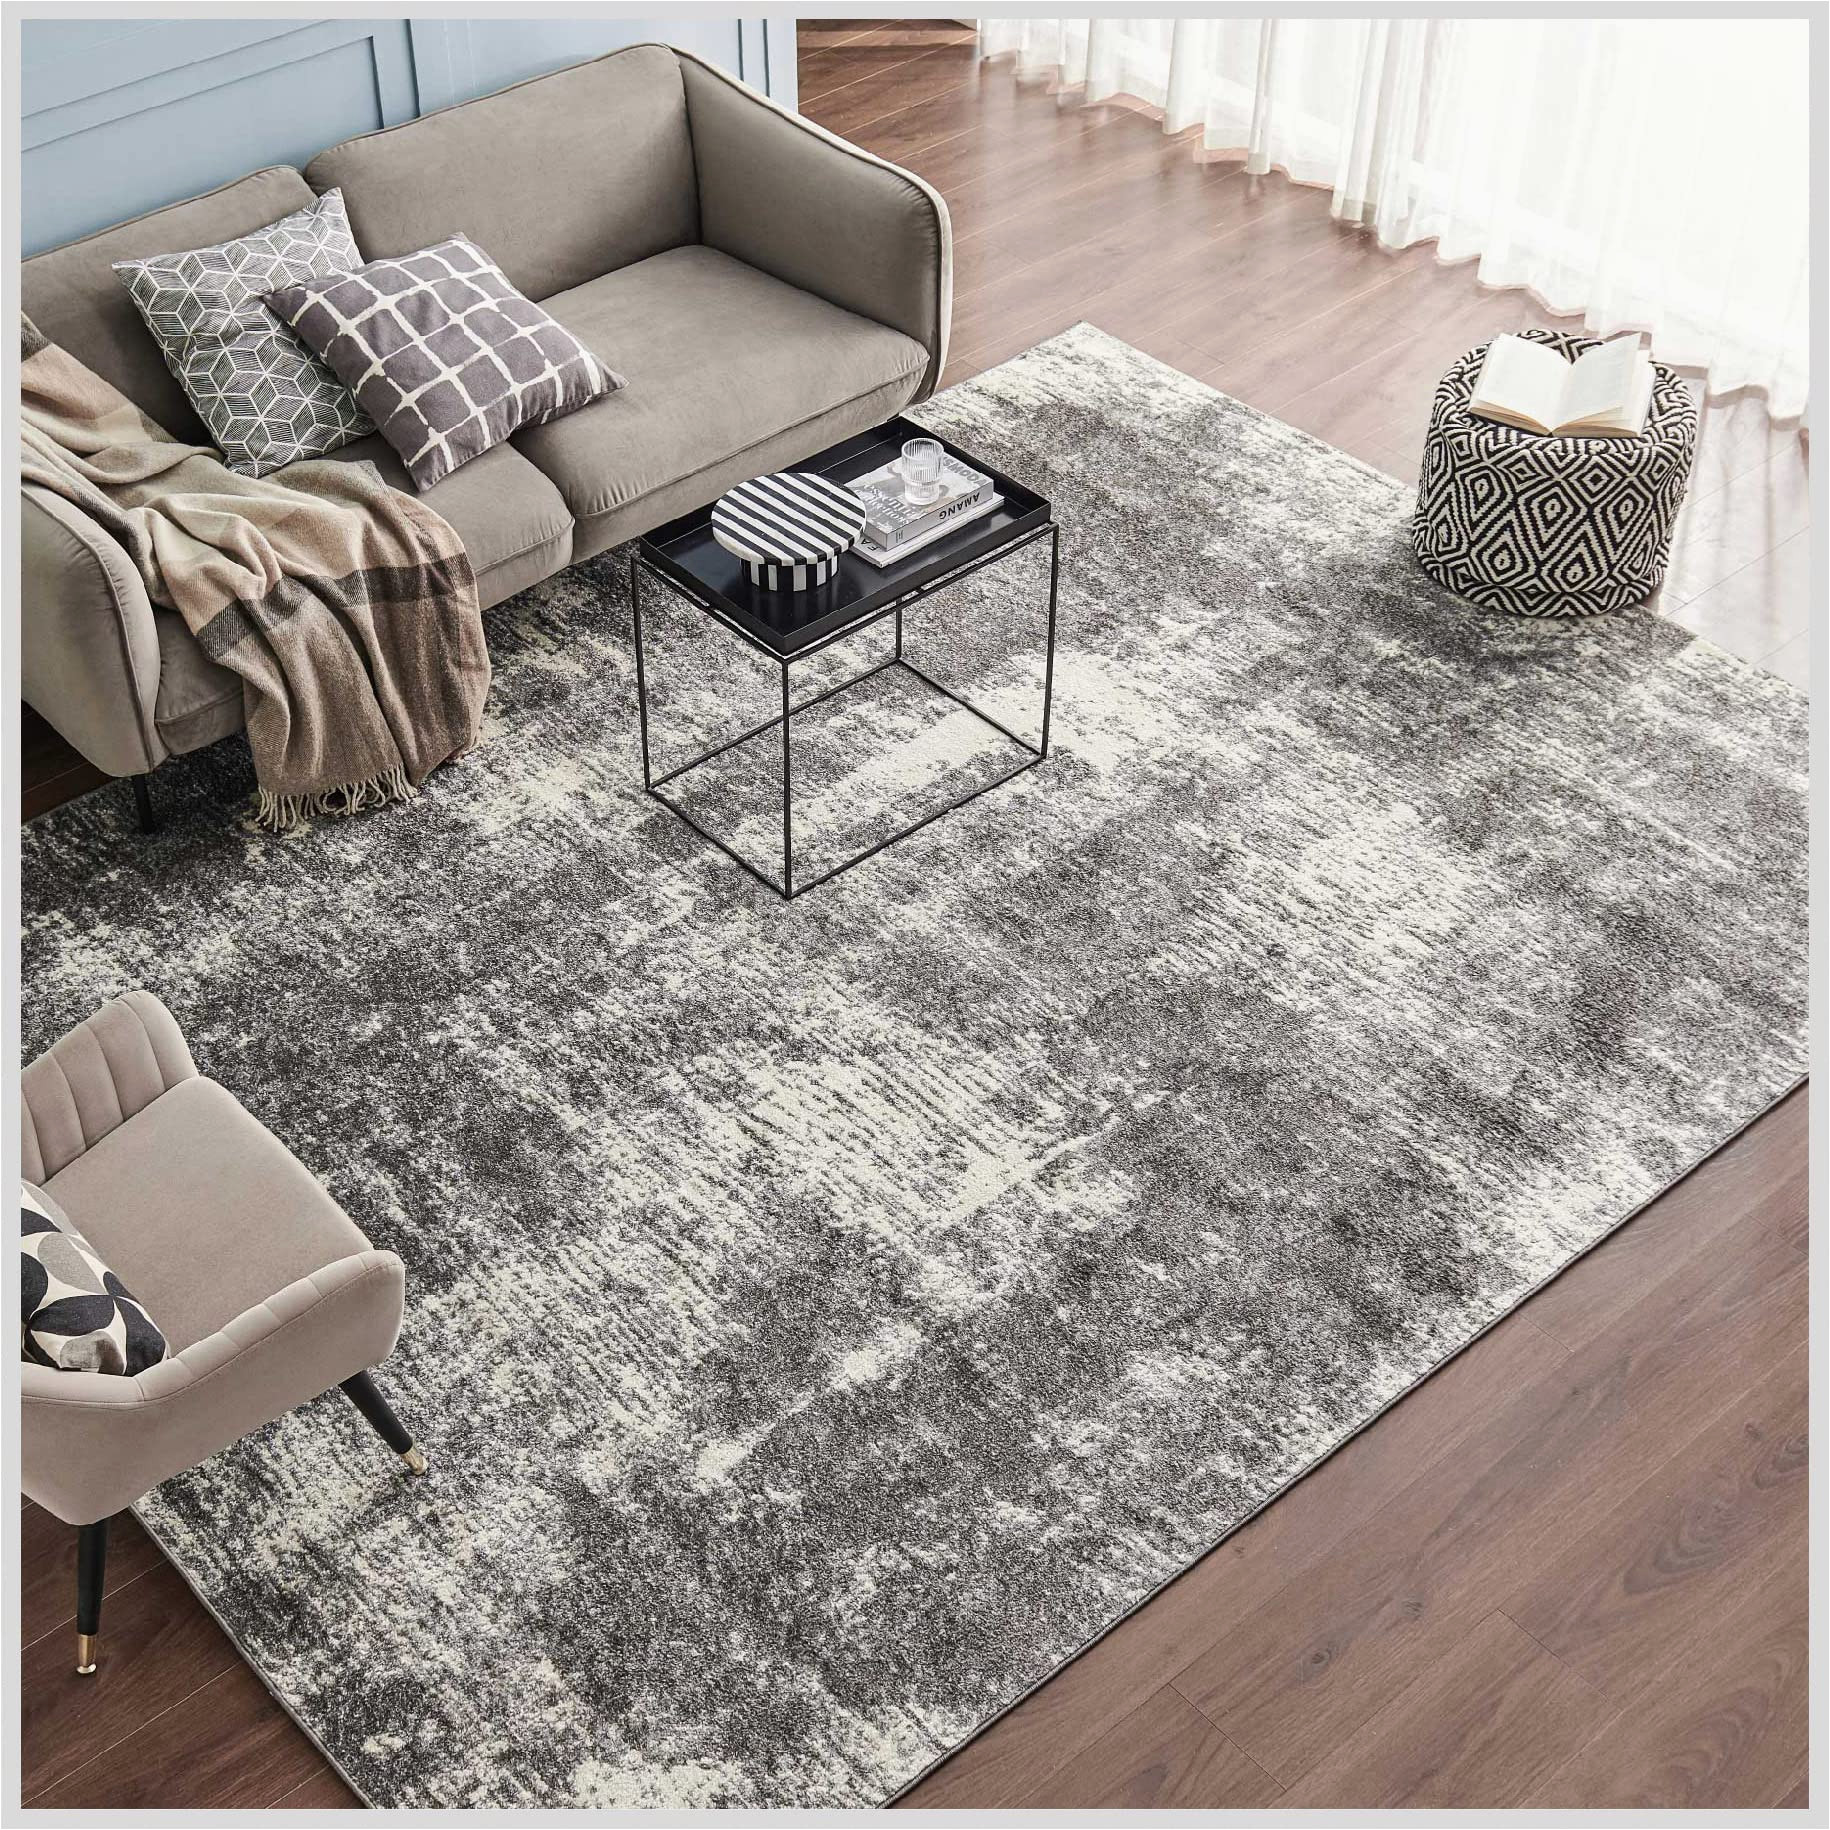 Large Low Pile area Rugs Eviva 8×10 area Rugs for Living Room Polypropylene Turkish Rug Indoor Low Pile Large 8 X 10′ area Rug with Stain-resistant Big Size Grey 8 by 10 area …